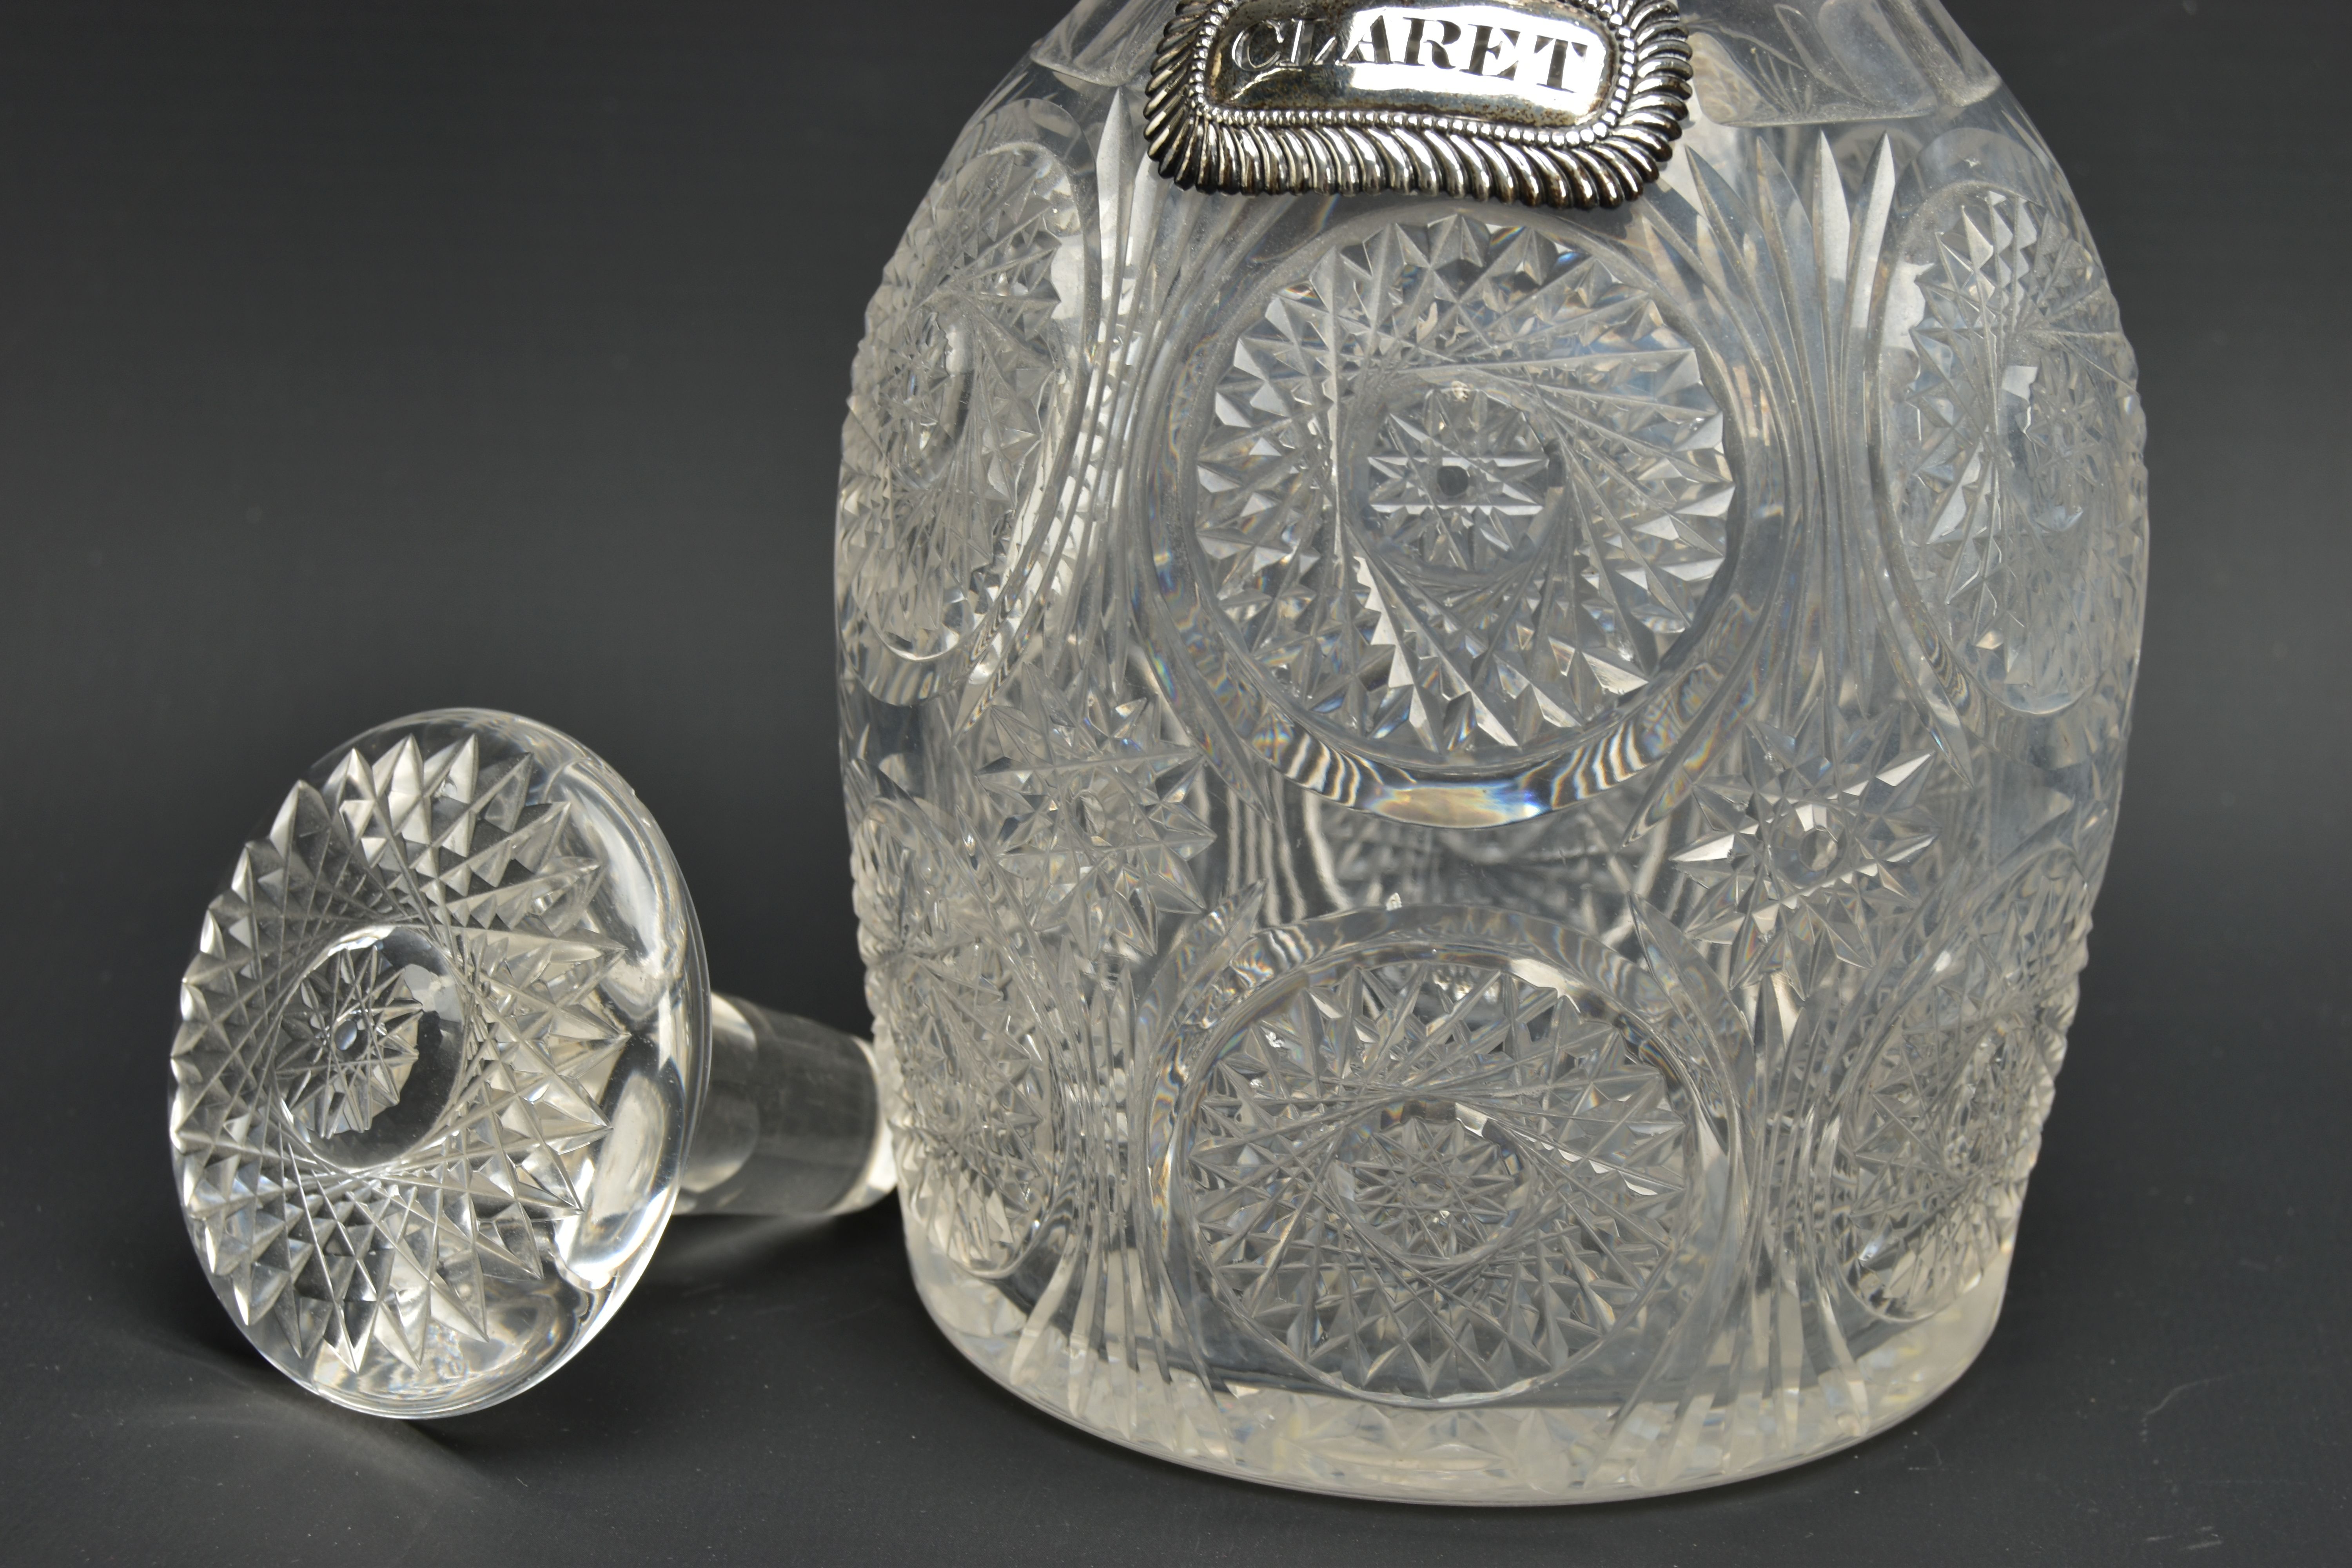 AN EARLY 19TH CENTURY PRUSSIAN SHAPED GLASS DECANTER AND A GEORGE V GLASS DECANTER, the early 19th - Image 10 of 15